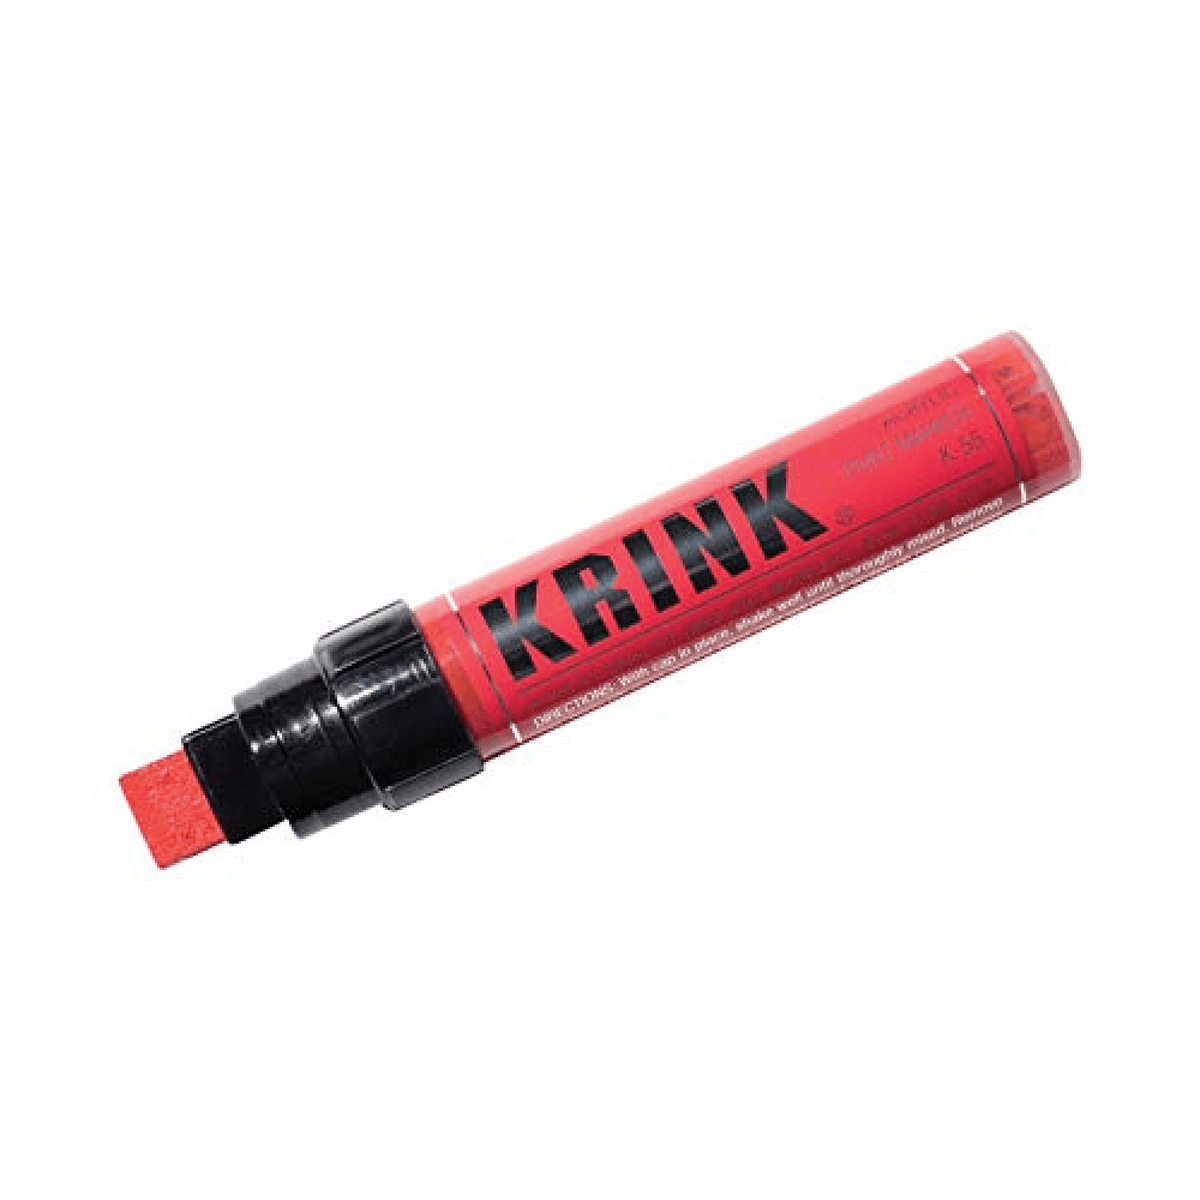 Krink K-55 Acrylic Paint Marker - Red | Spray Planet